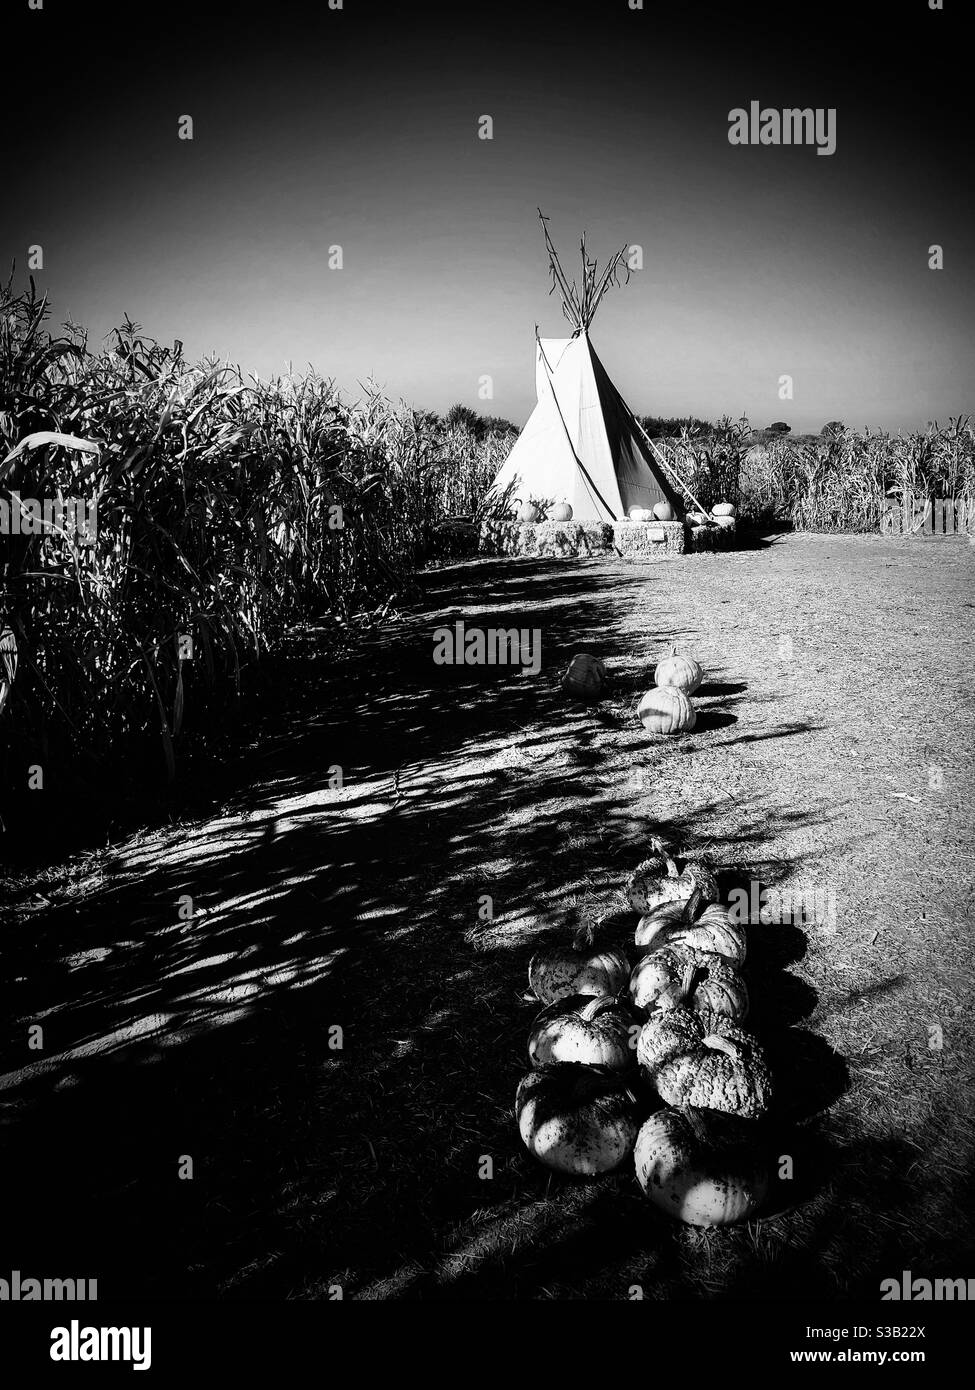 The pumpkins covered by the shadows of the leaves of the corn plants from the left side of the photo lead a viewer’s sight to the American Indian tent at the distance in the farm scene. Stock Photo